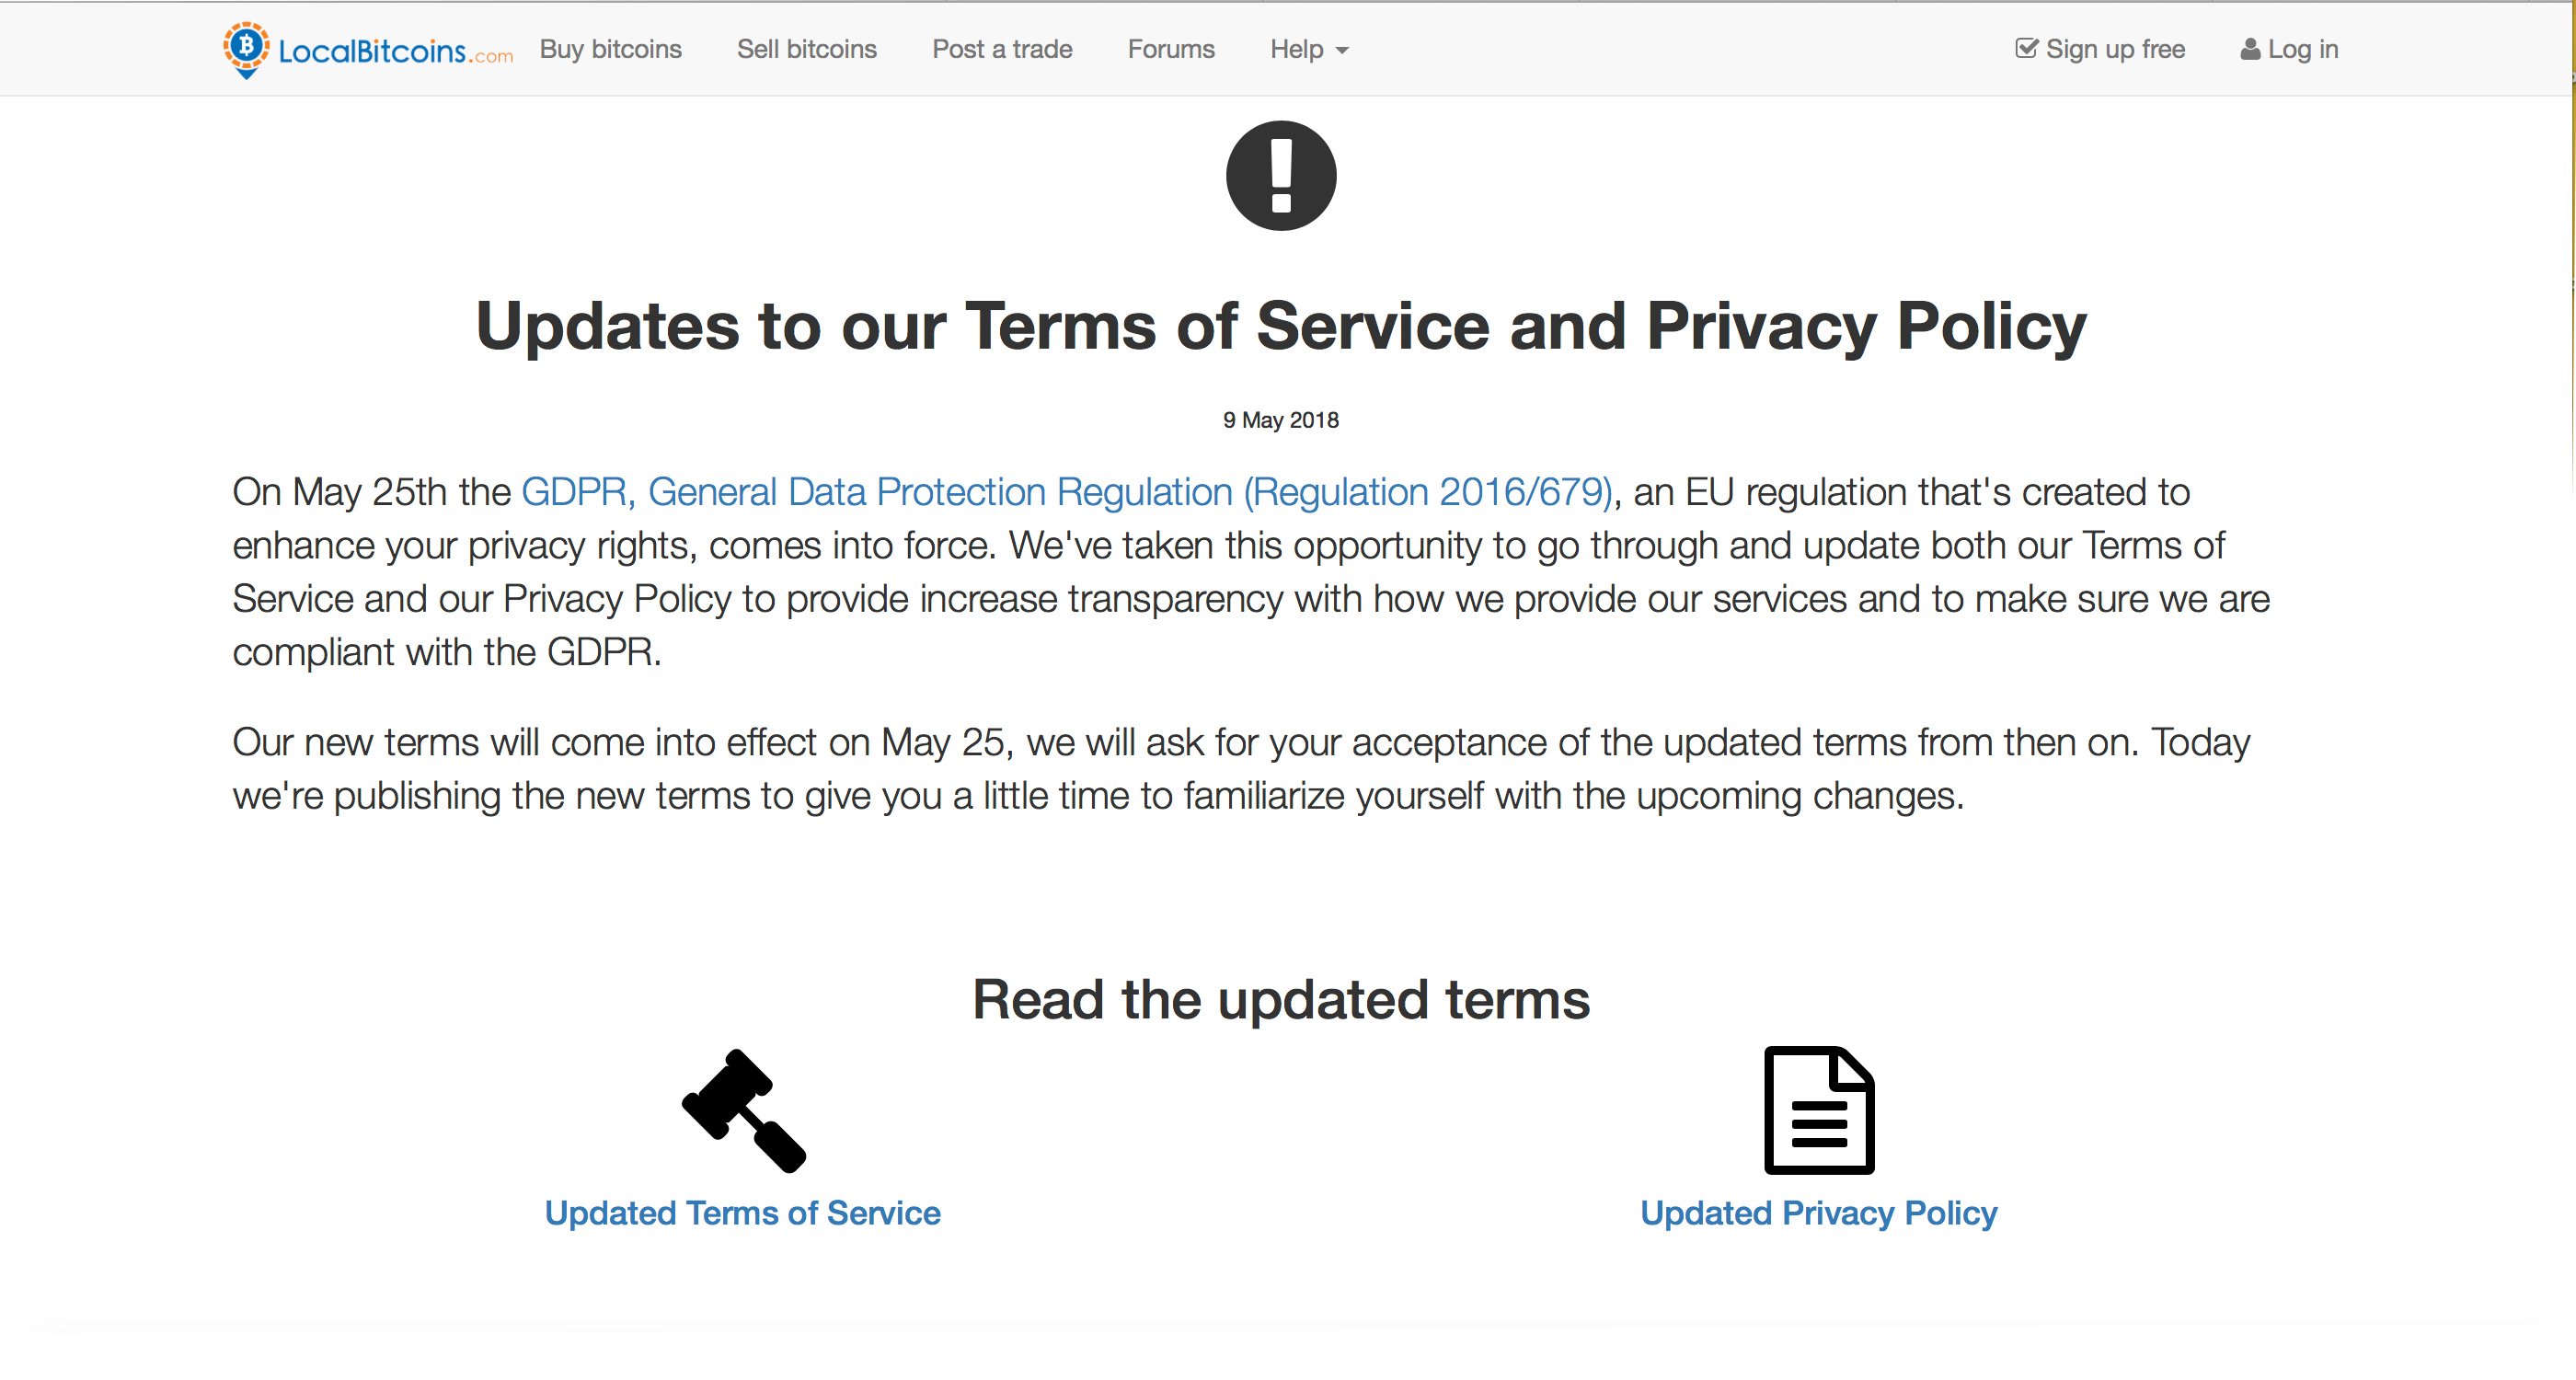 Localbitcoins Updates ToS: 'Some Situations May Require ID'